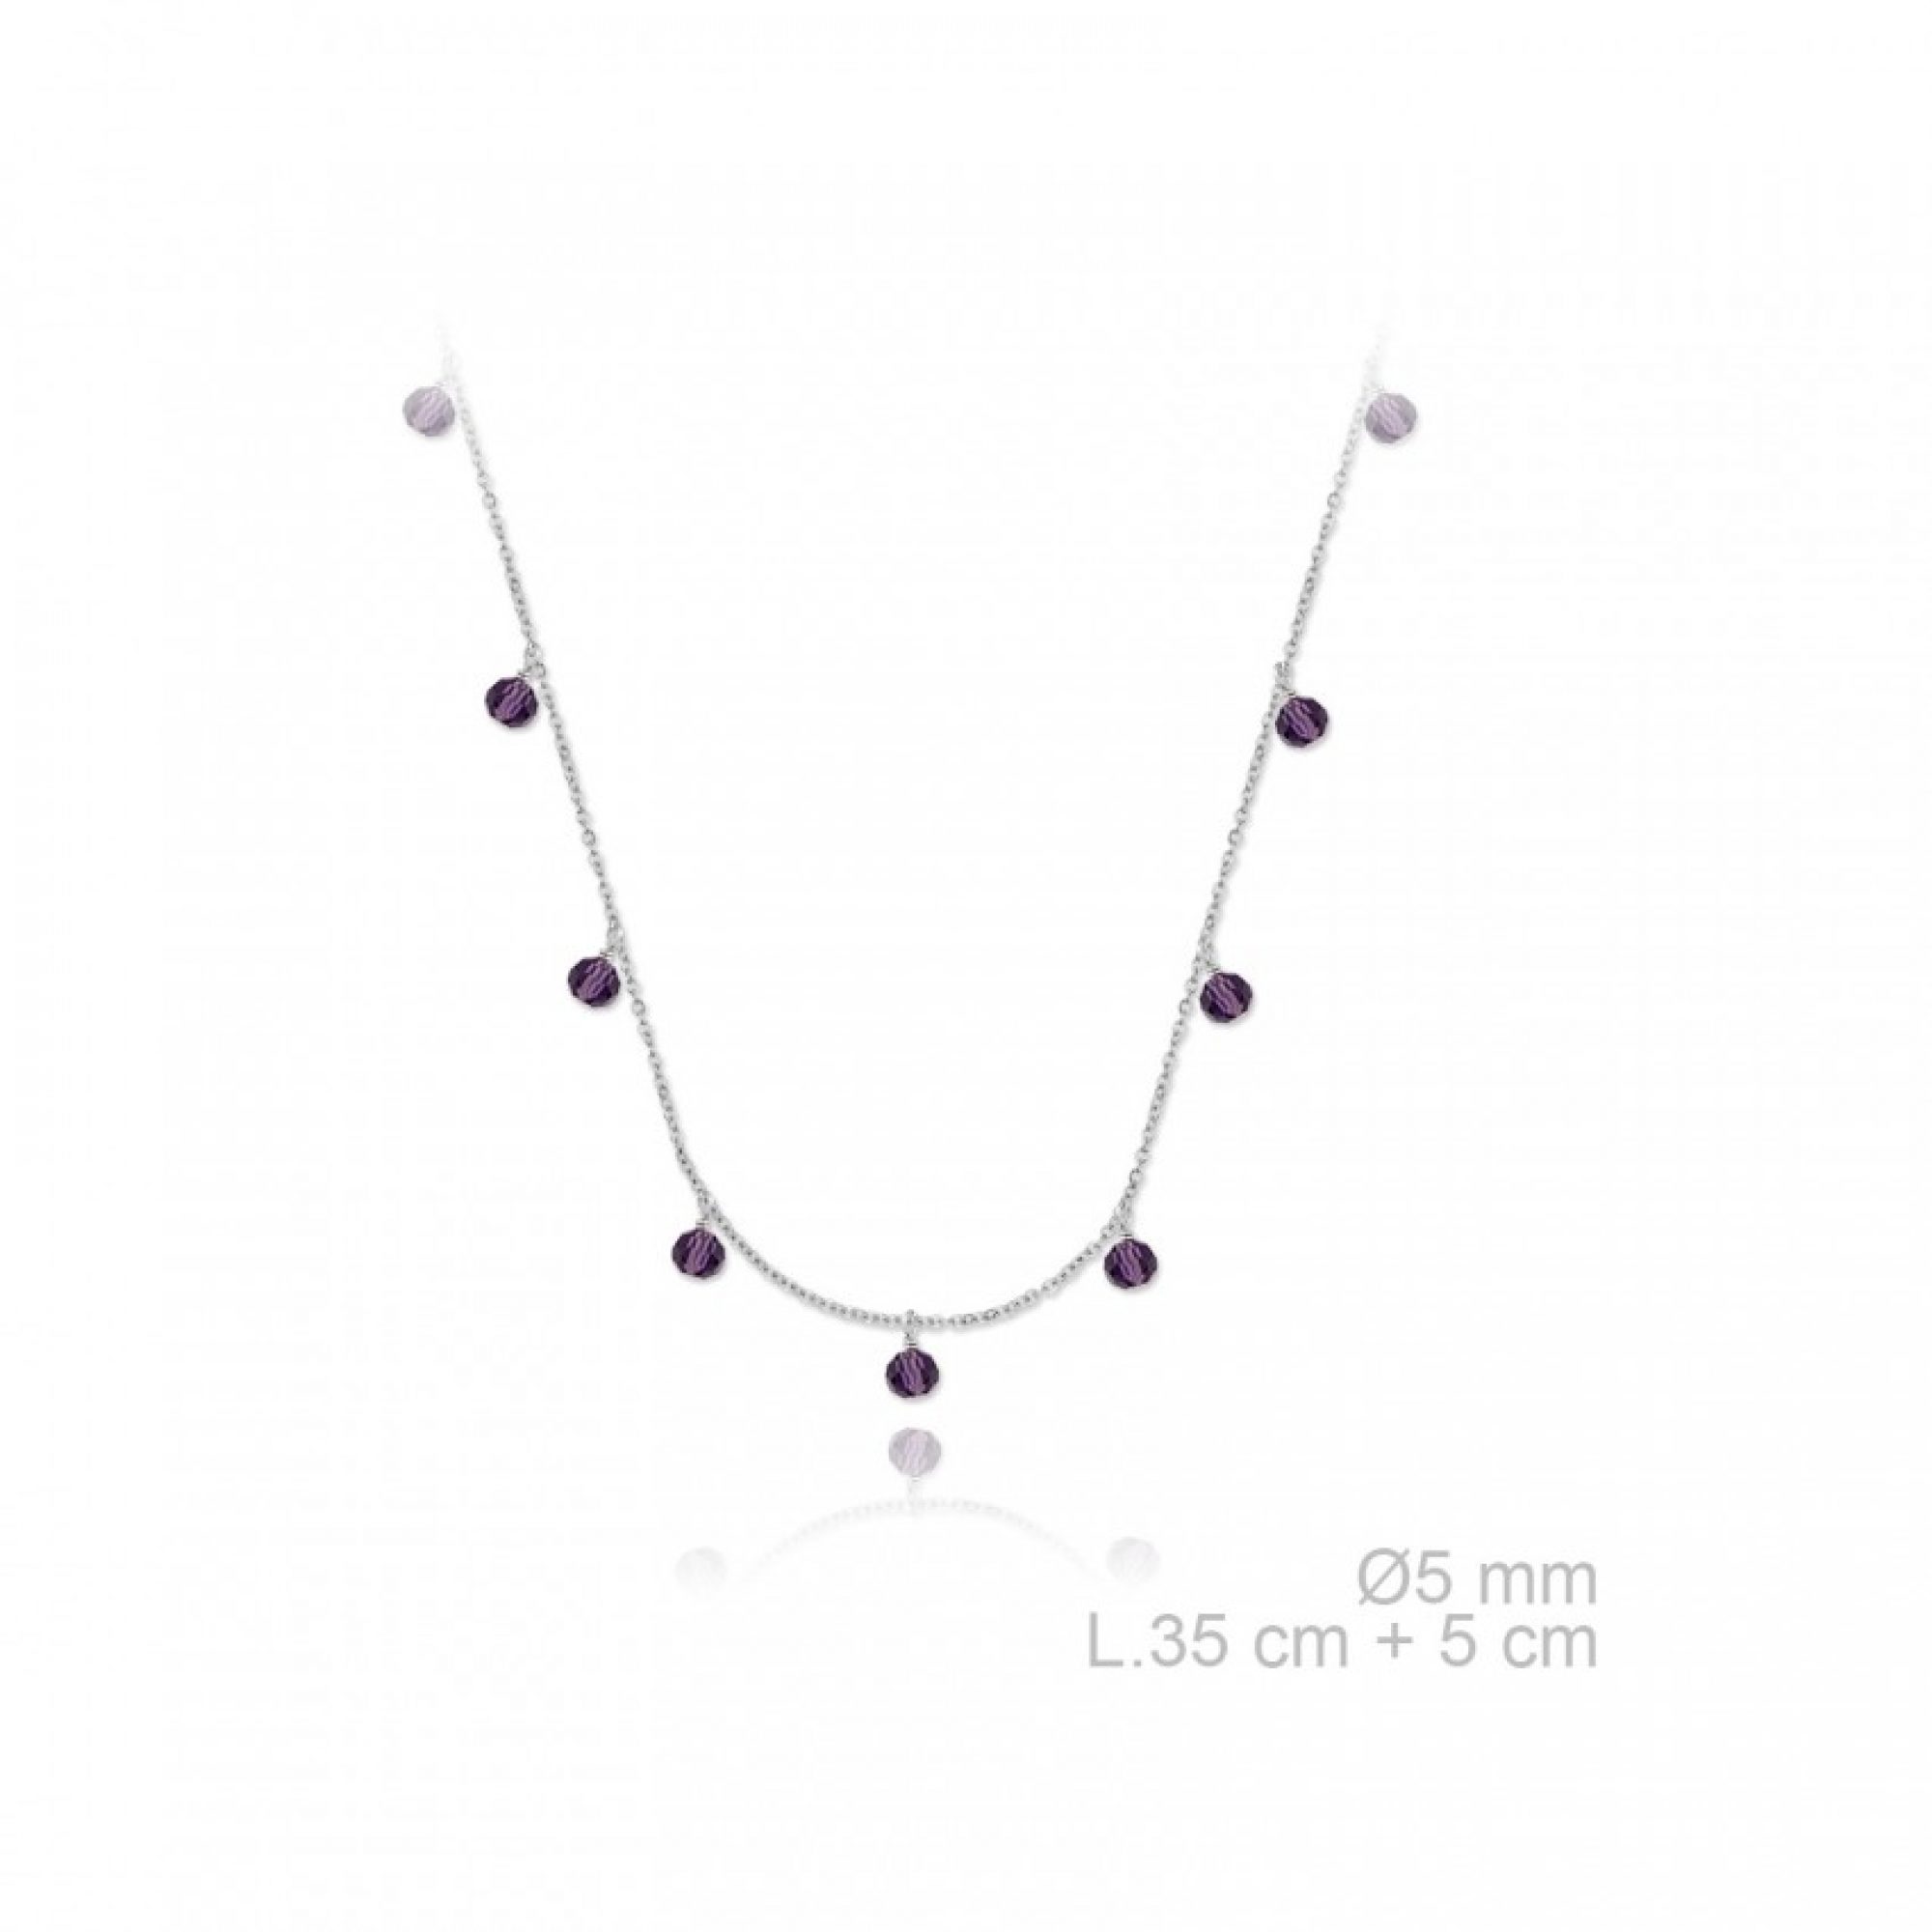 Silver dangle necklace with purple stones